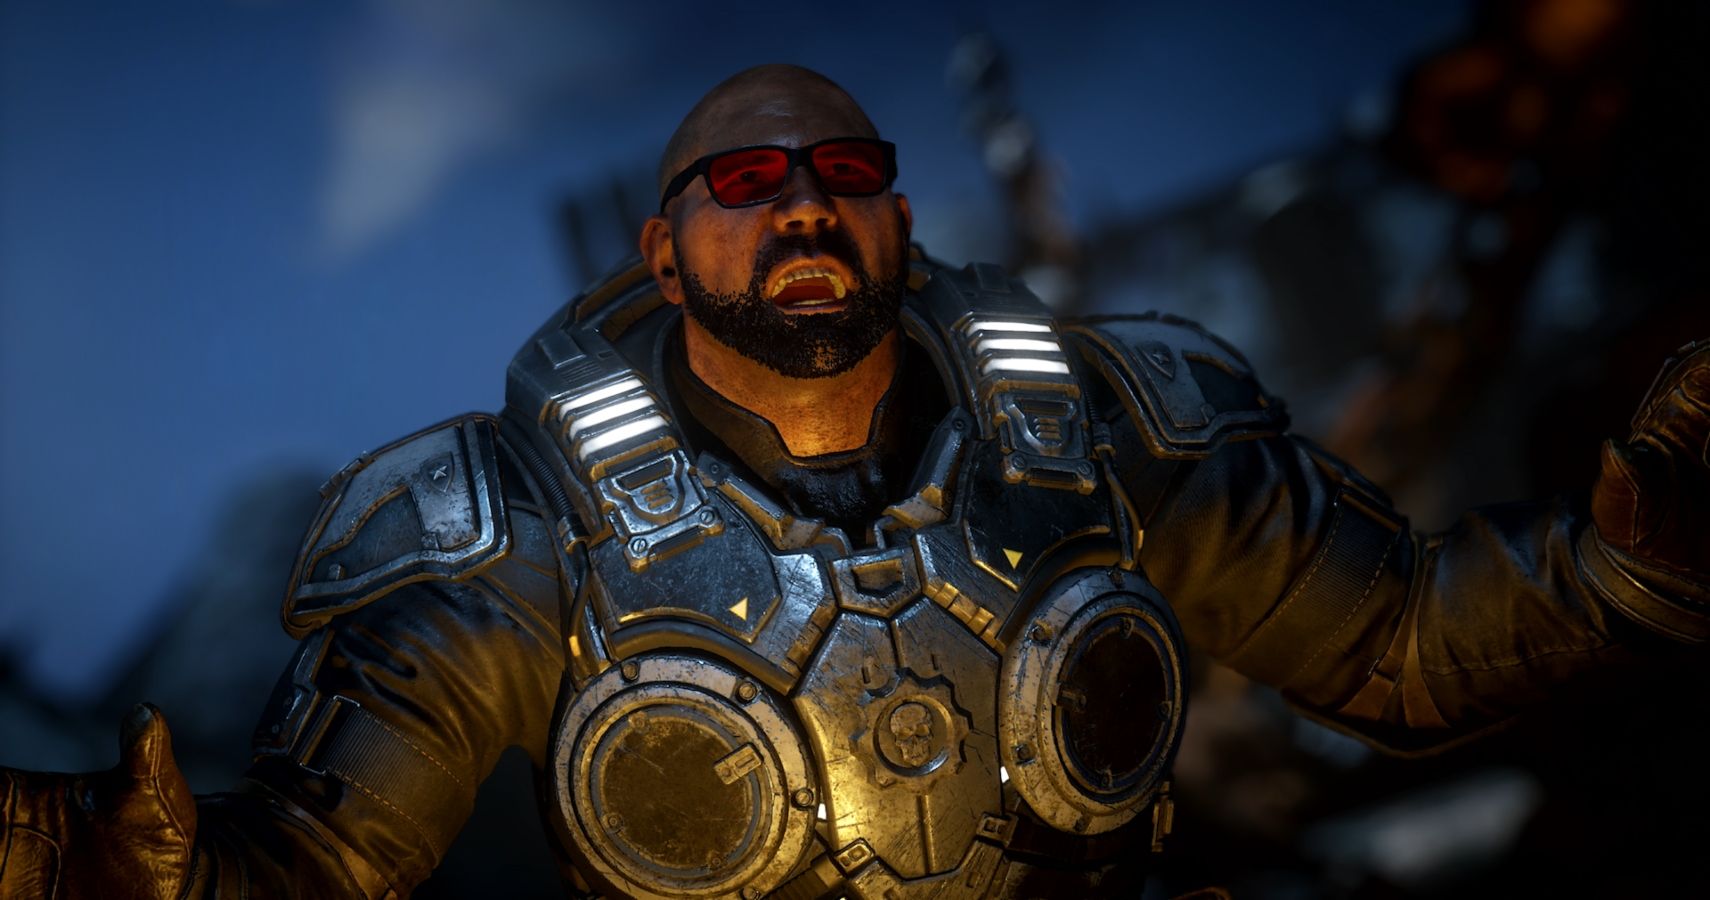 Gears 5 recasts Marcus Fenix as Dave Bautista in campaign